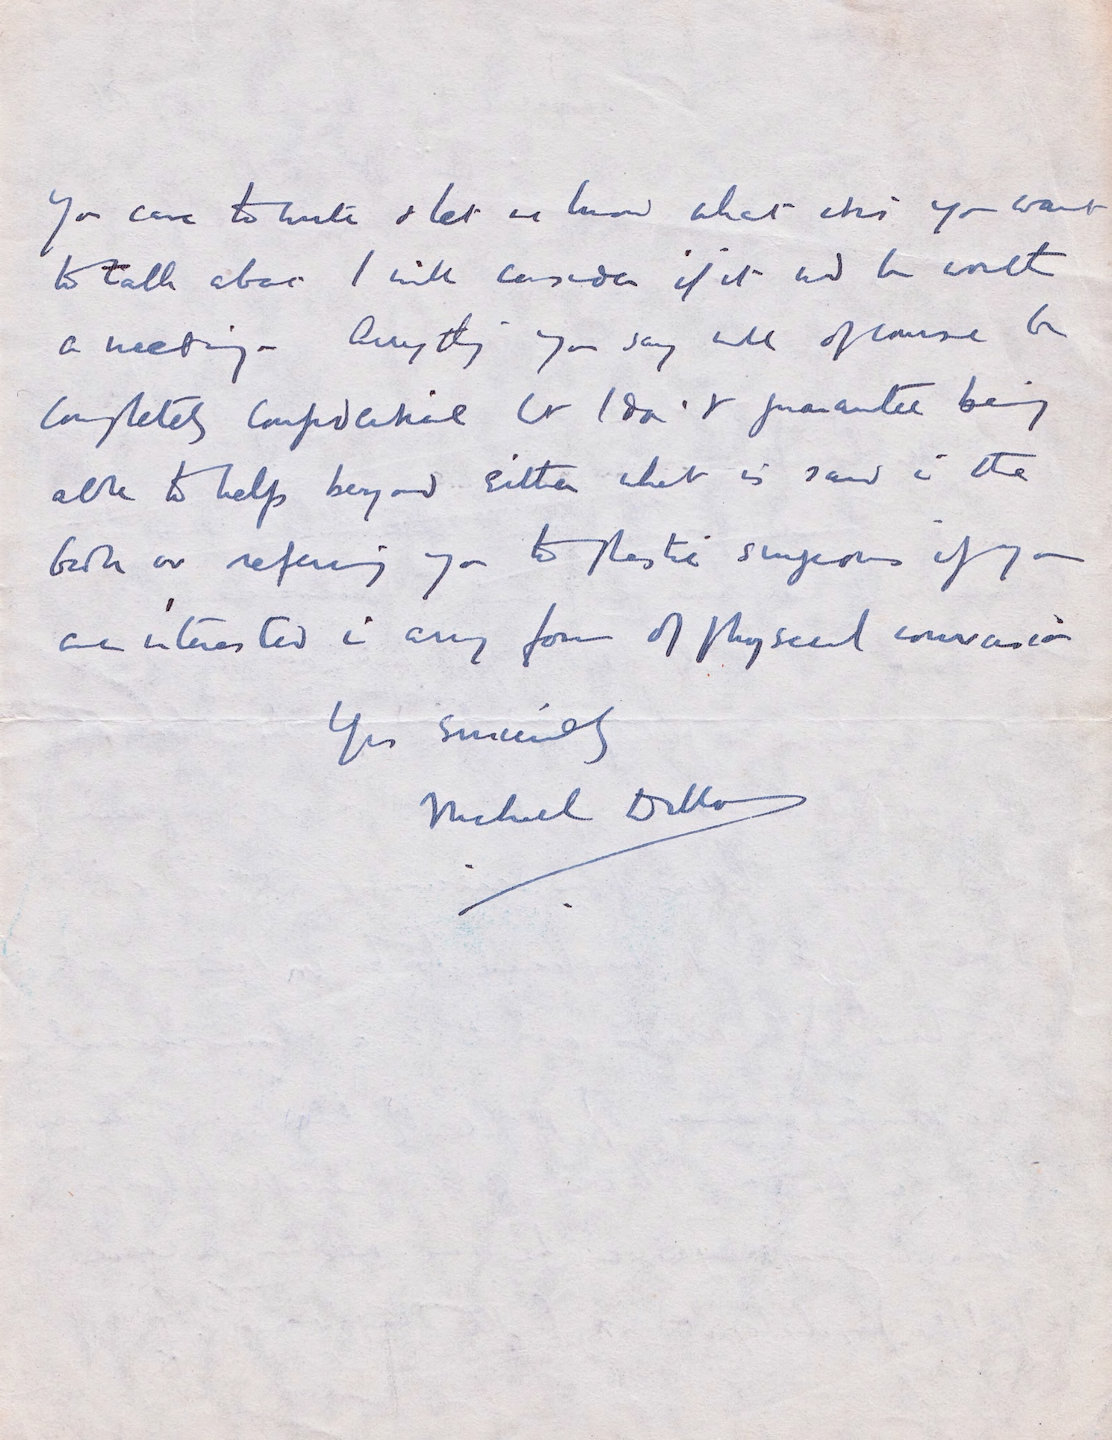 Dillon's first letter to Cowell [Private collection of Liz Hodgkinson]